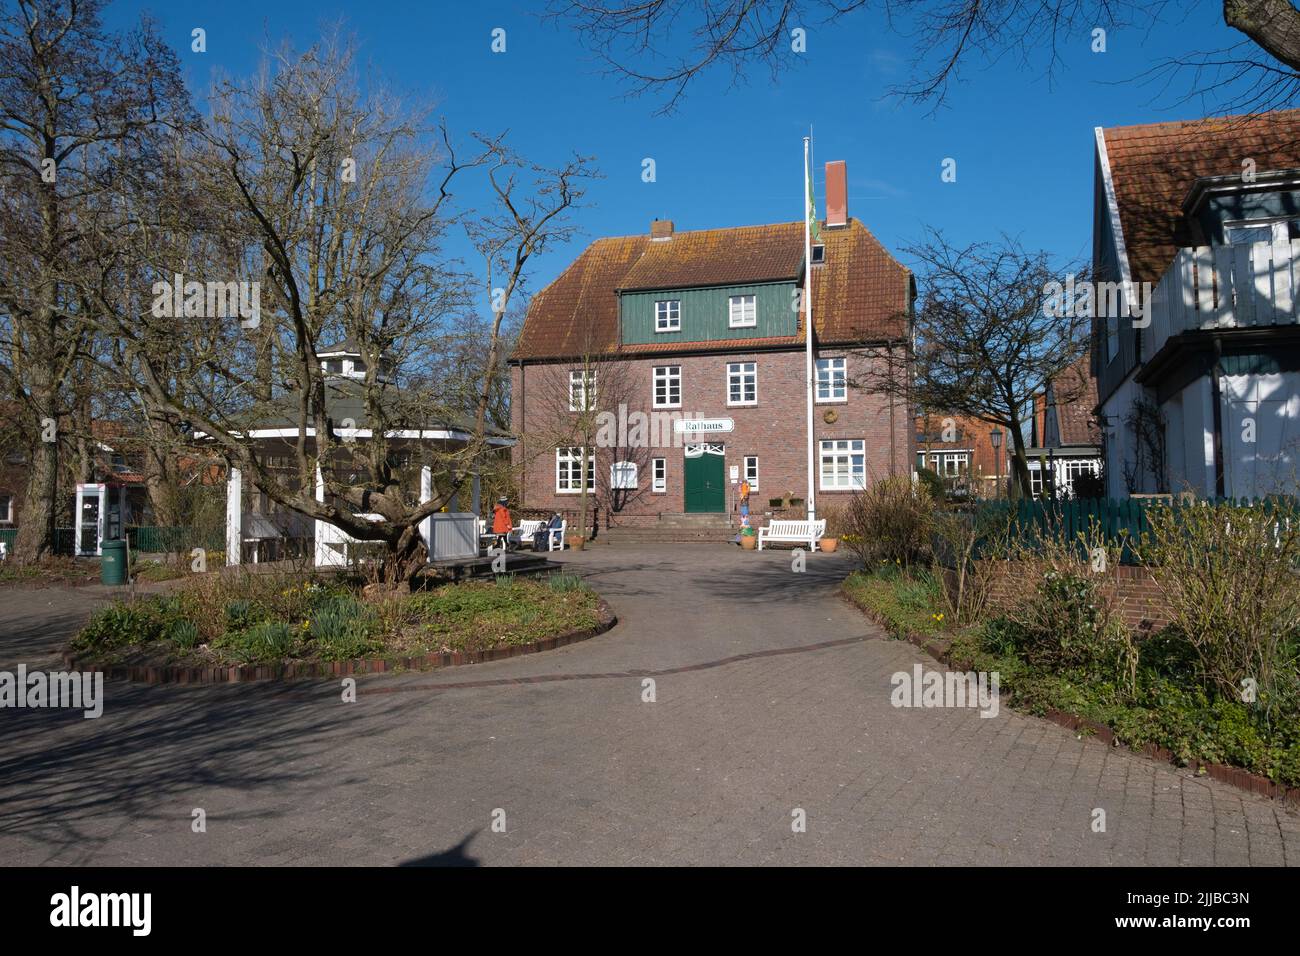 Old town hall of Spiekeroog, Germany Stock Photo